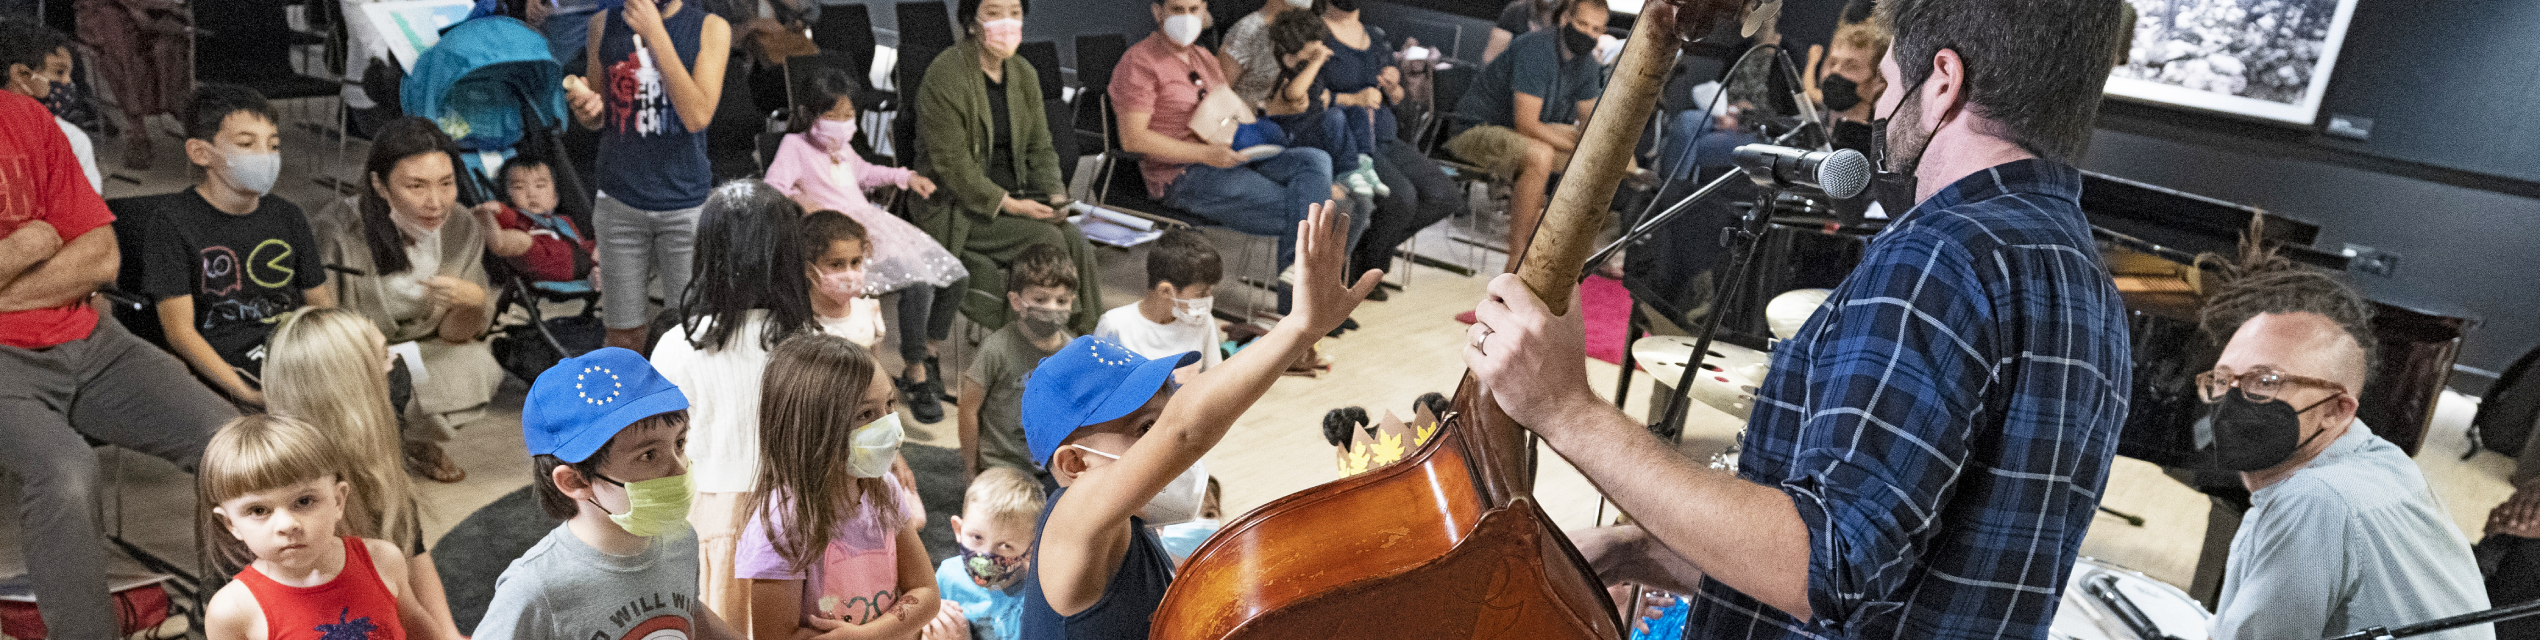 A man plays the cello in front of young children wearing masks.